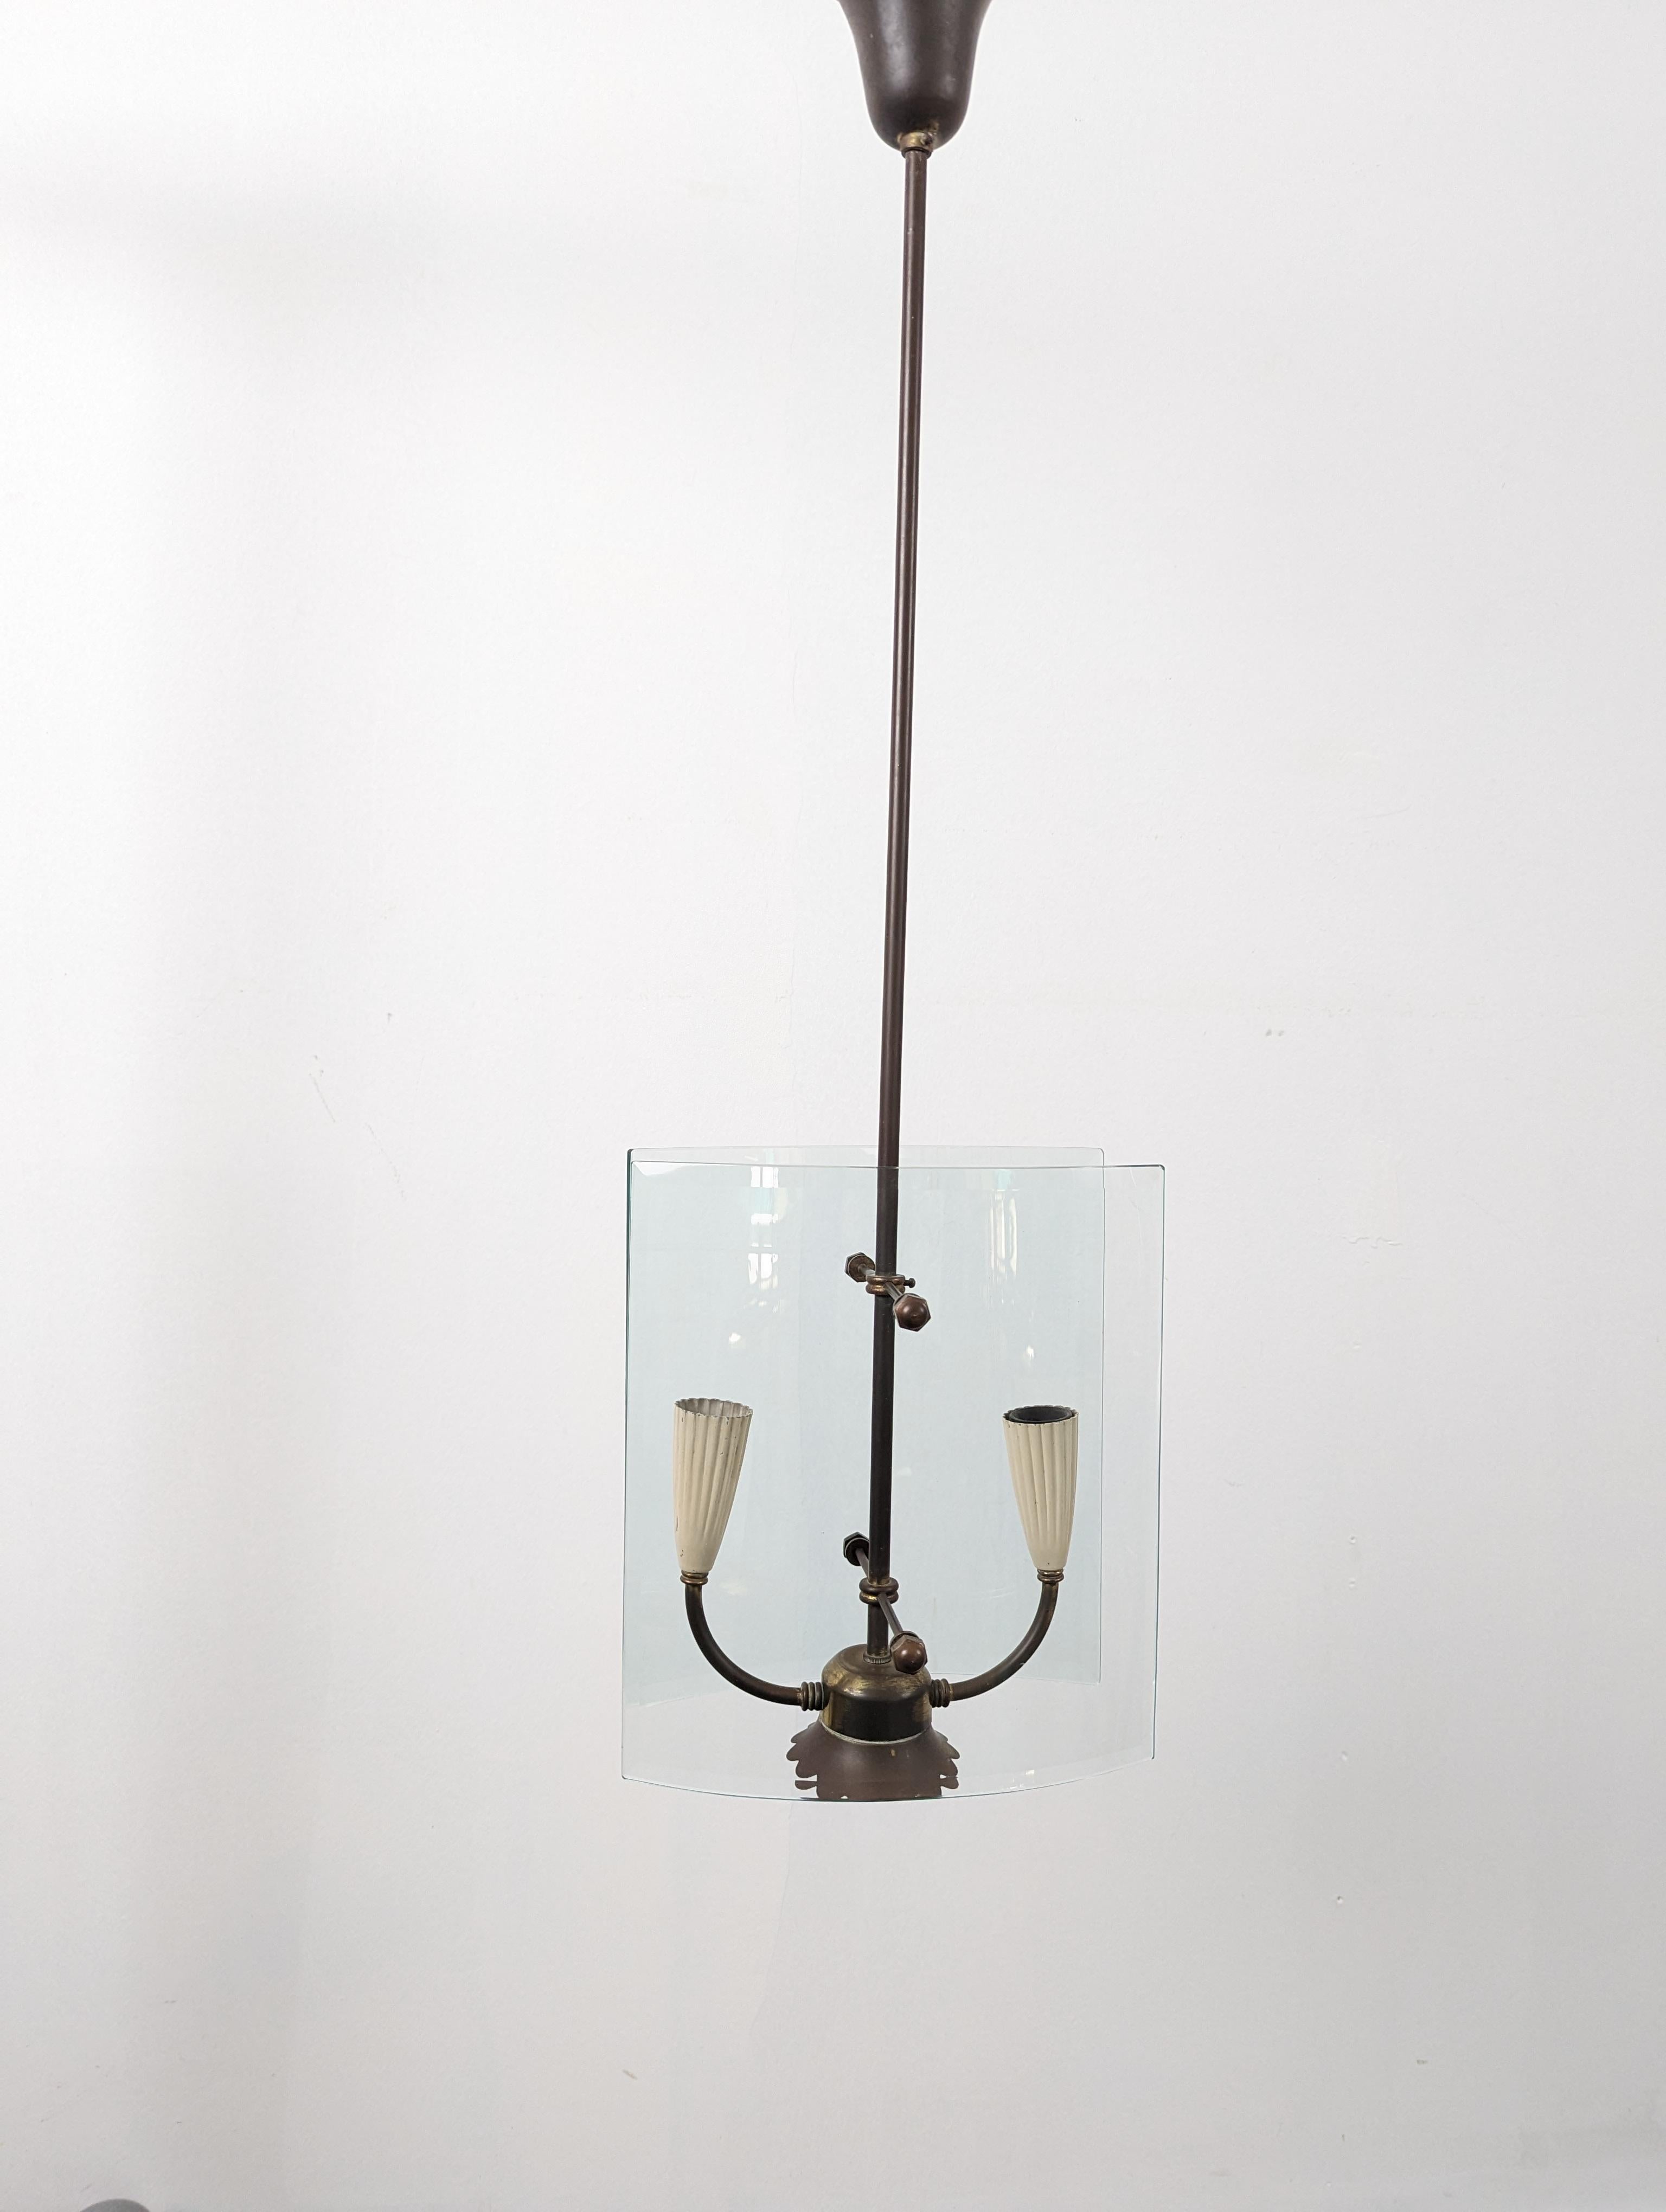 Elegant midcentury Italian designer lamp, designed by Pietro Chiesa and made by Fontana Arte in Italy, during the 1940s. The light has two facing curved glass panels. This ceiling lamp is a perfect example of Italian design descended from an eminent